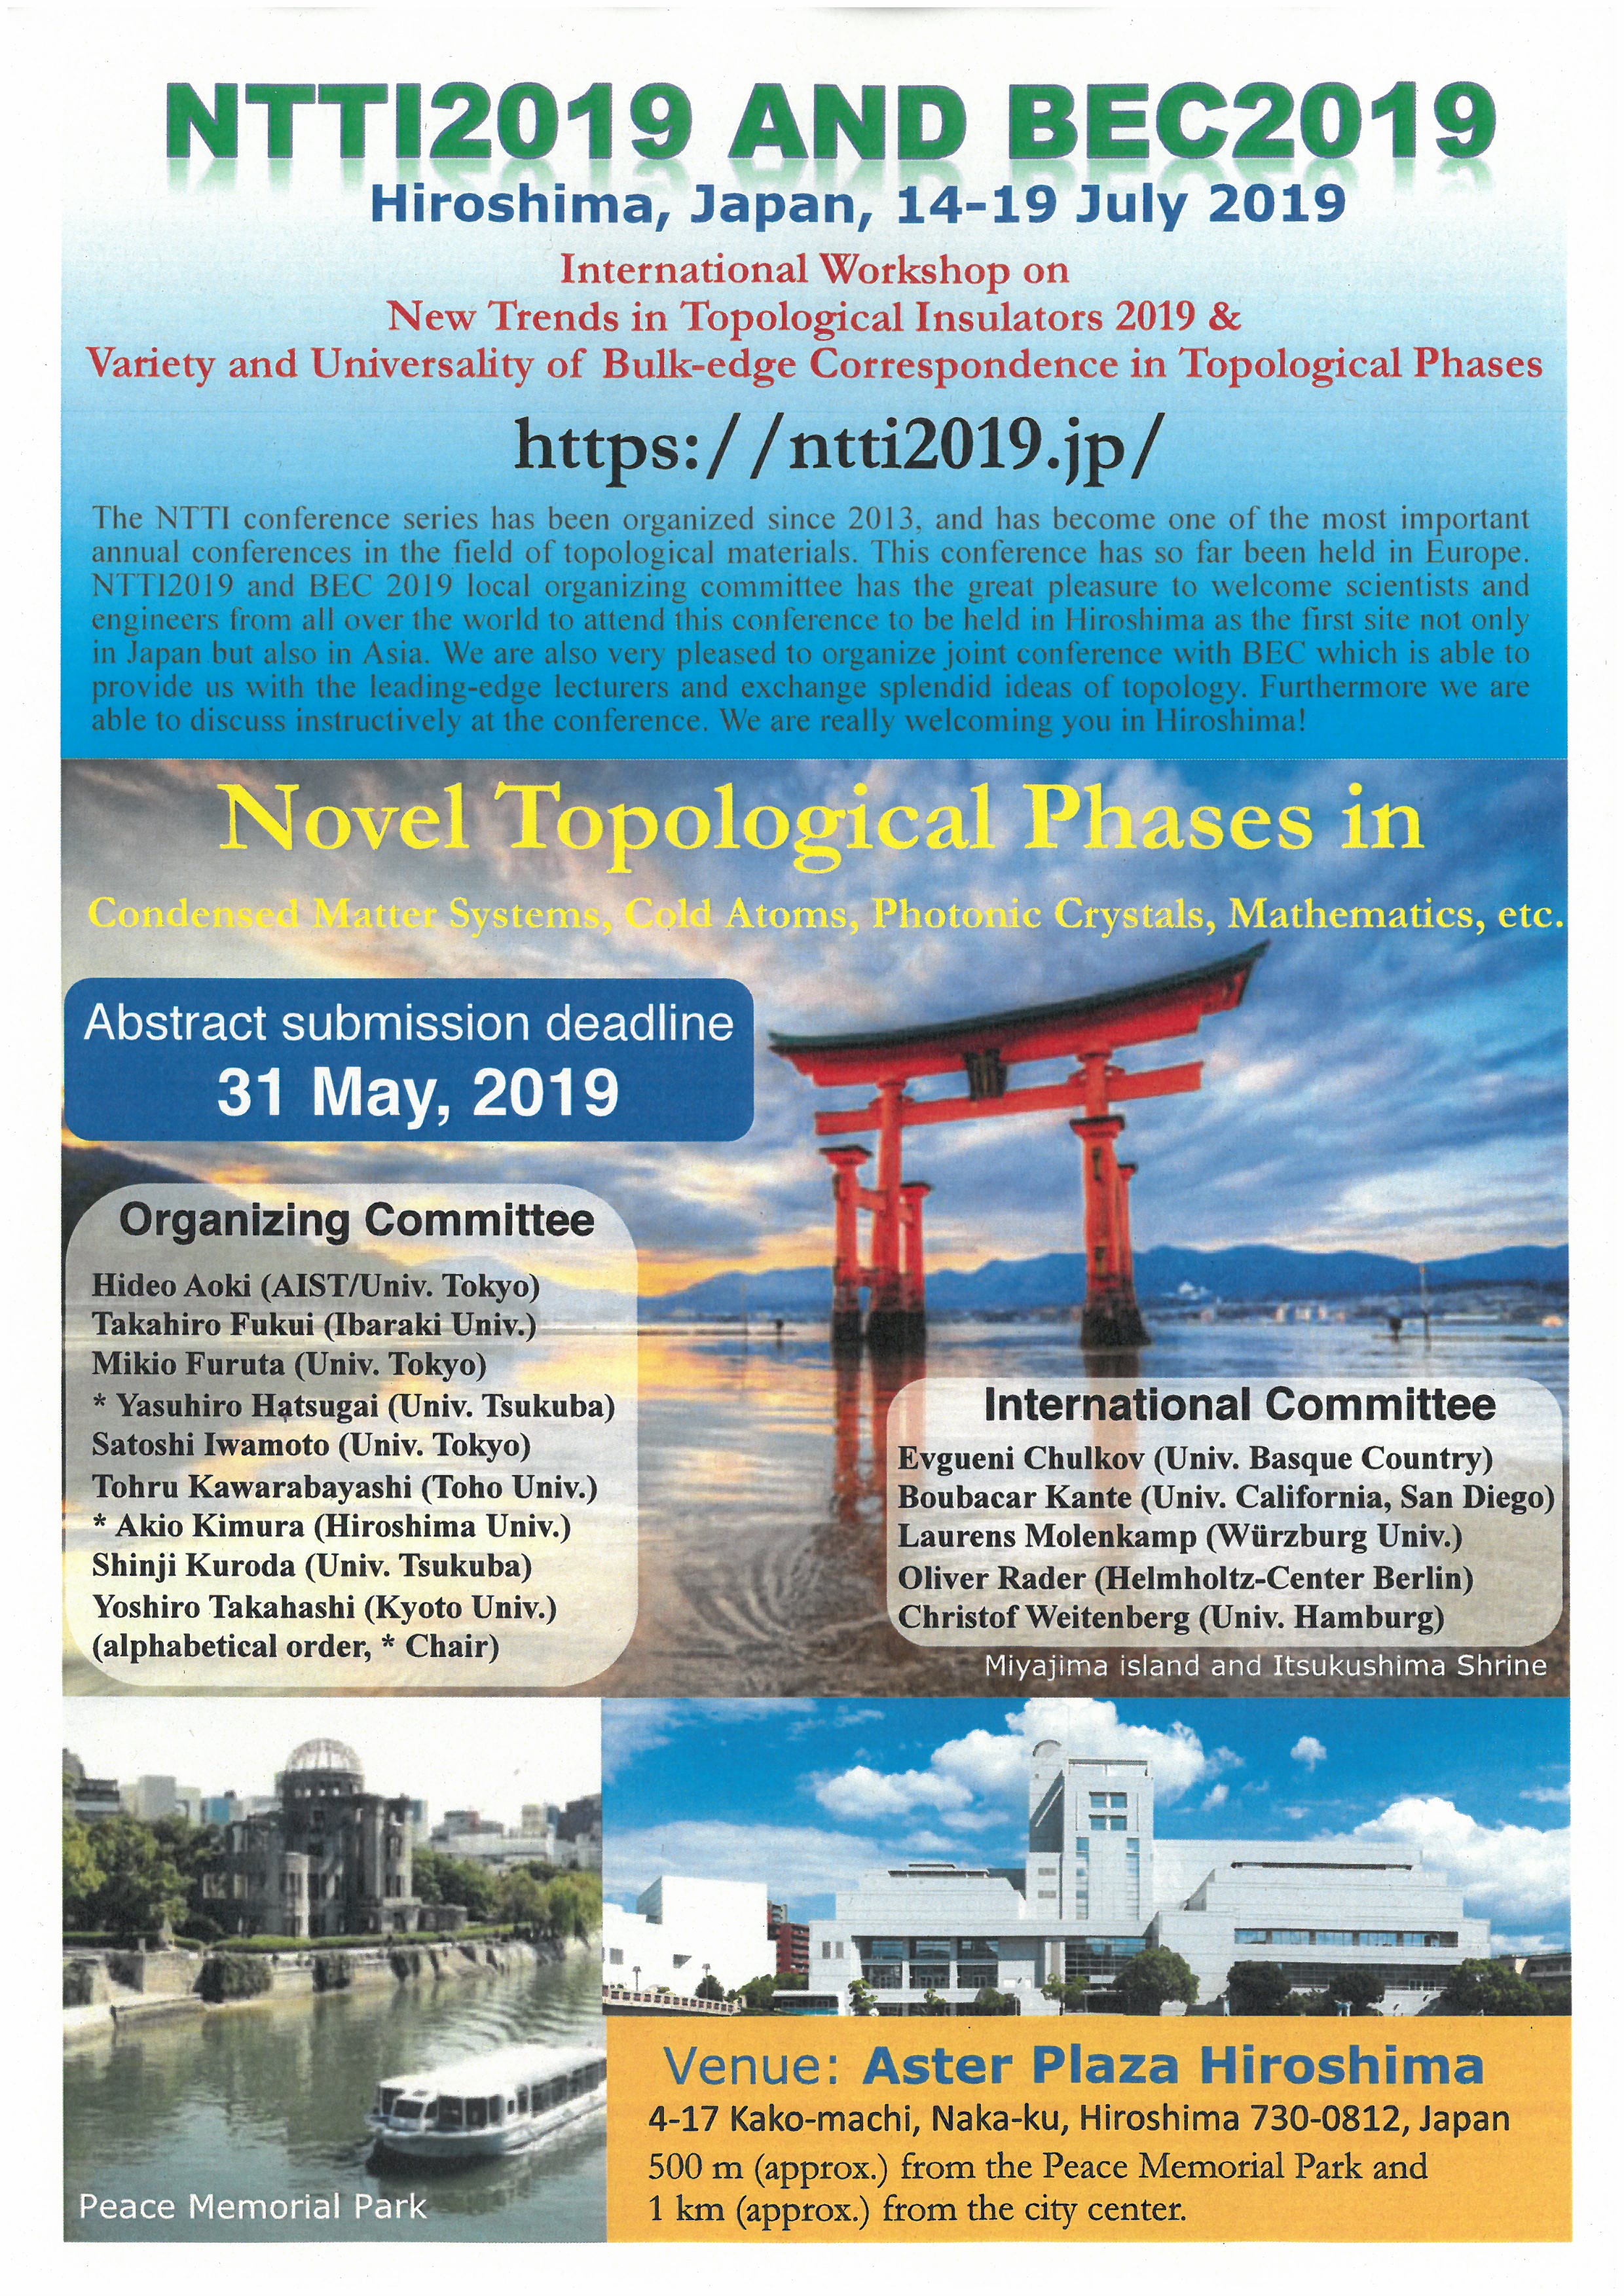 NTTI 2019 AND BEC 2019　ポスター